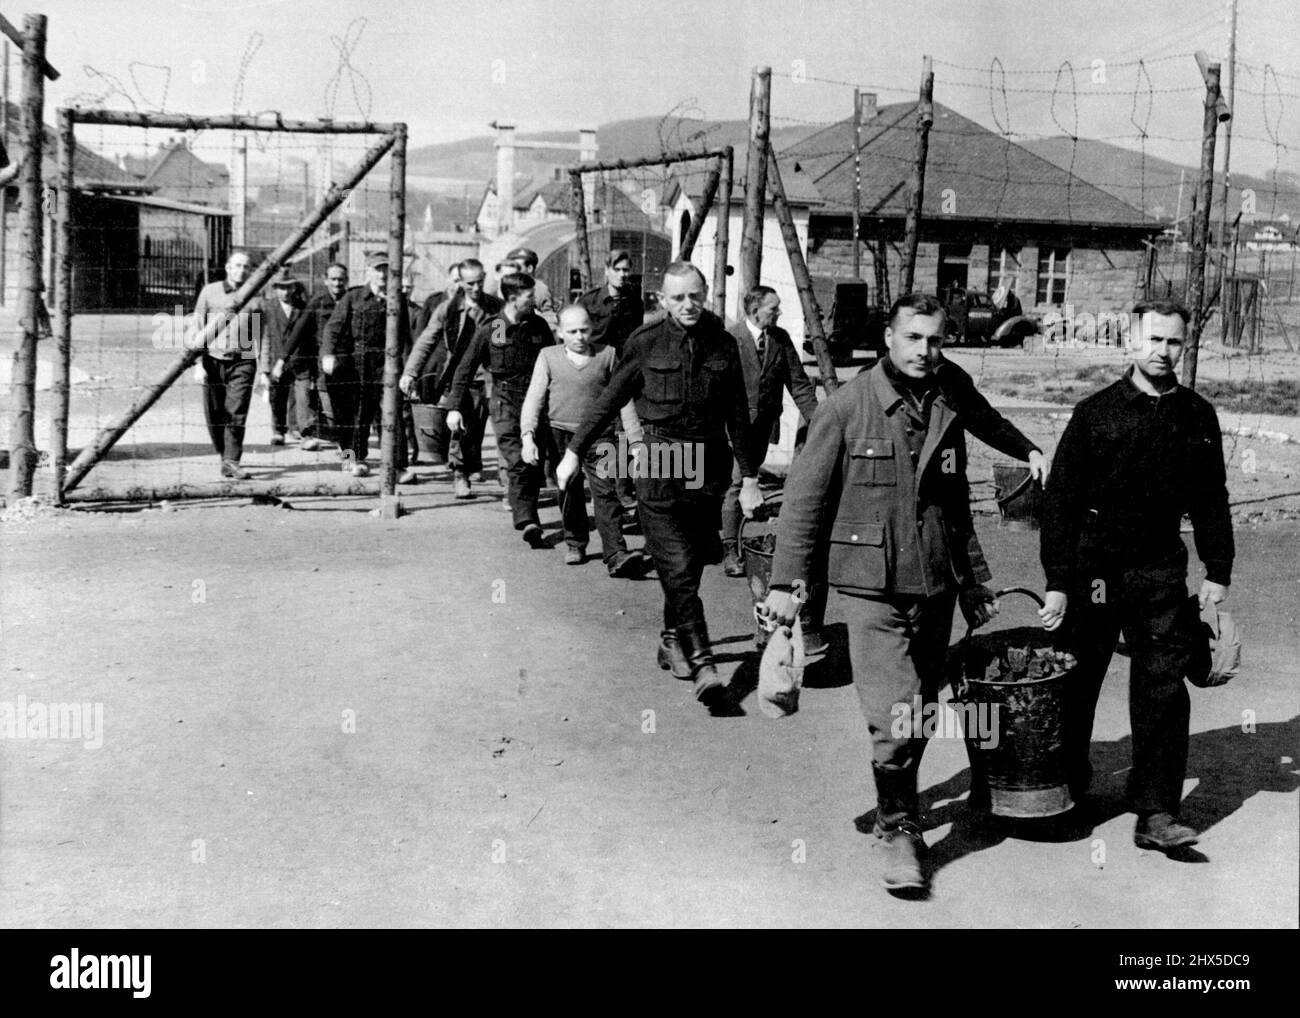 Life in an Internment Camp for German Nazis. A working party of Nazi internees returning with buckets of coke for the kitchens through the gates of Camp Roosevelt, Hemer, Germany. At Hemer, in the British-occupied zone of Germany, 3,300 Nazis (mostly Gestapo and S.S. men) are interned in Camp Roosevelt, formerly a German prisoner-of-war camp Stalag 6b. The internees have their time fully occupied, because,in addition to their instructional centre where they are taught everything from dramatic art to brick-laying, they have all the camp chores to perform, such as working on the allotments and f Stock Photo